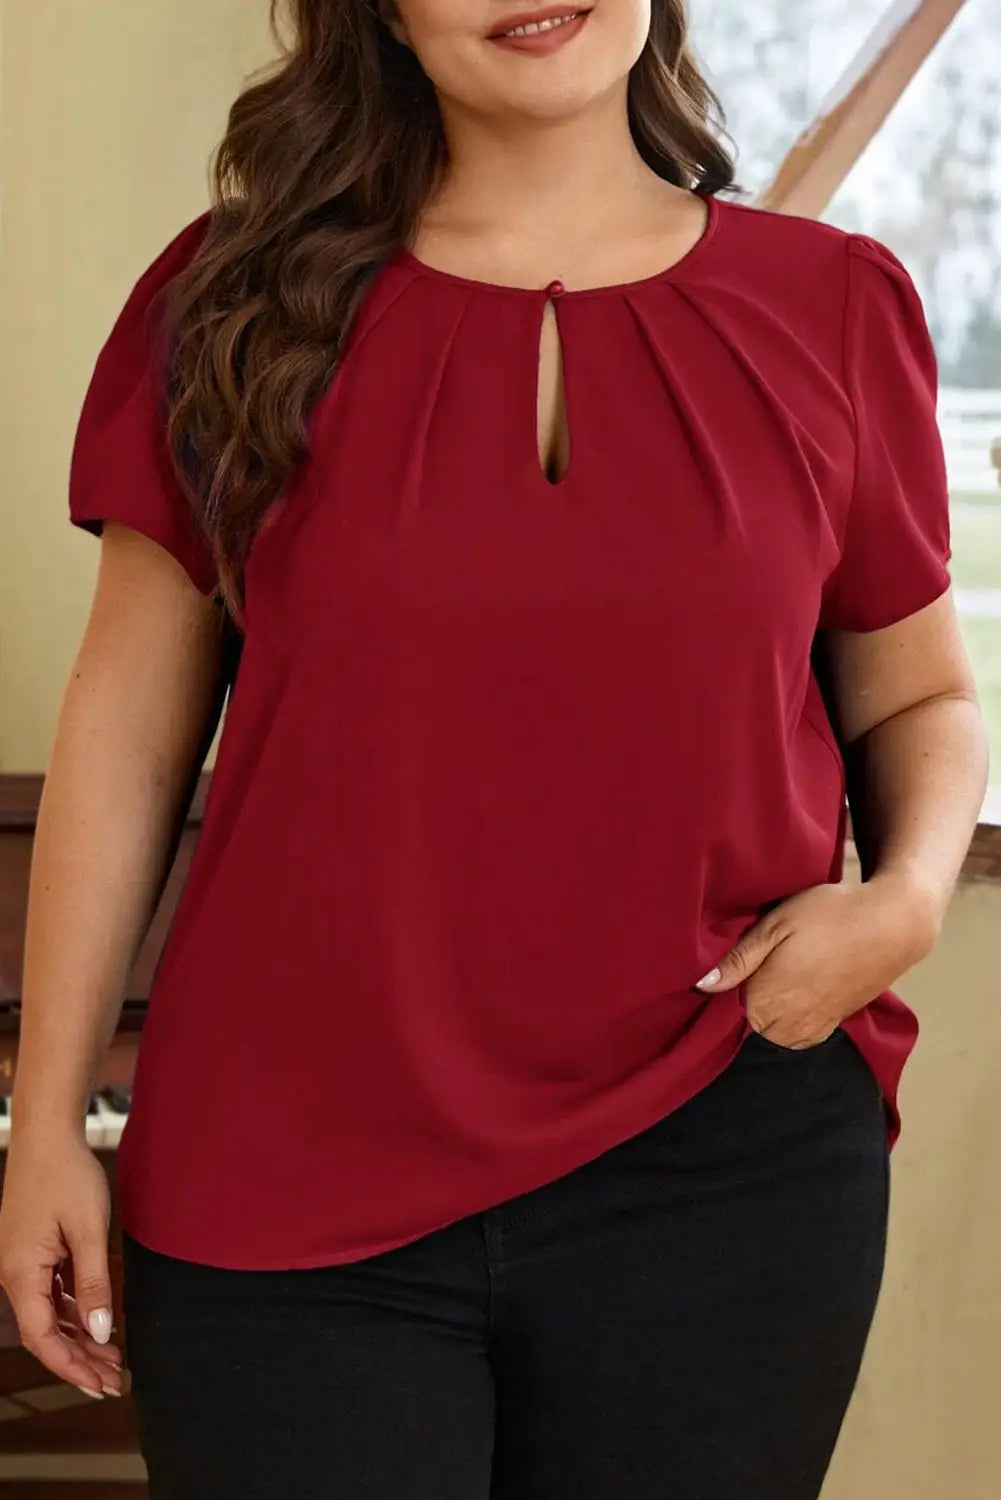 Red dahlia keyhole pleated crew neck plus size t shirt - 1x / 100% polyester